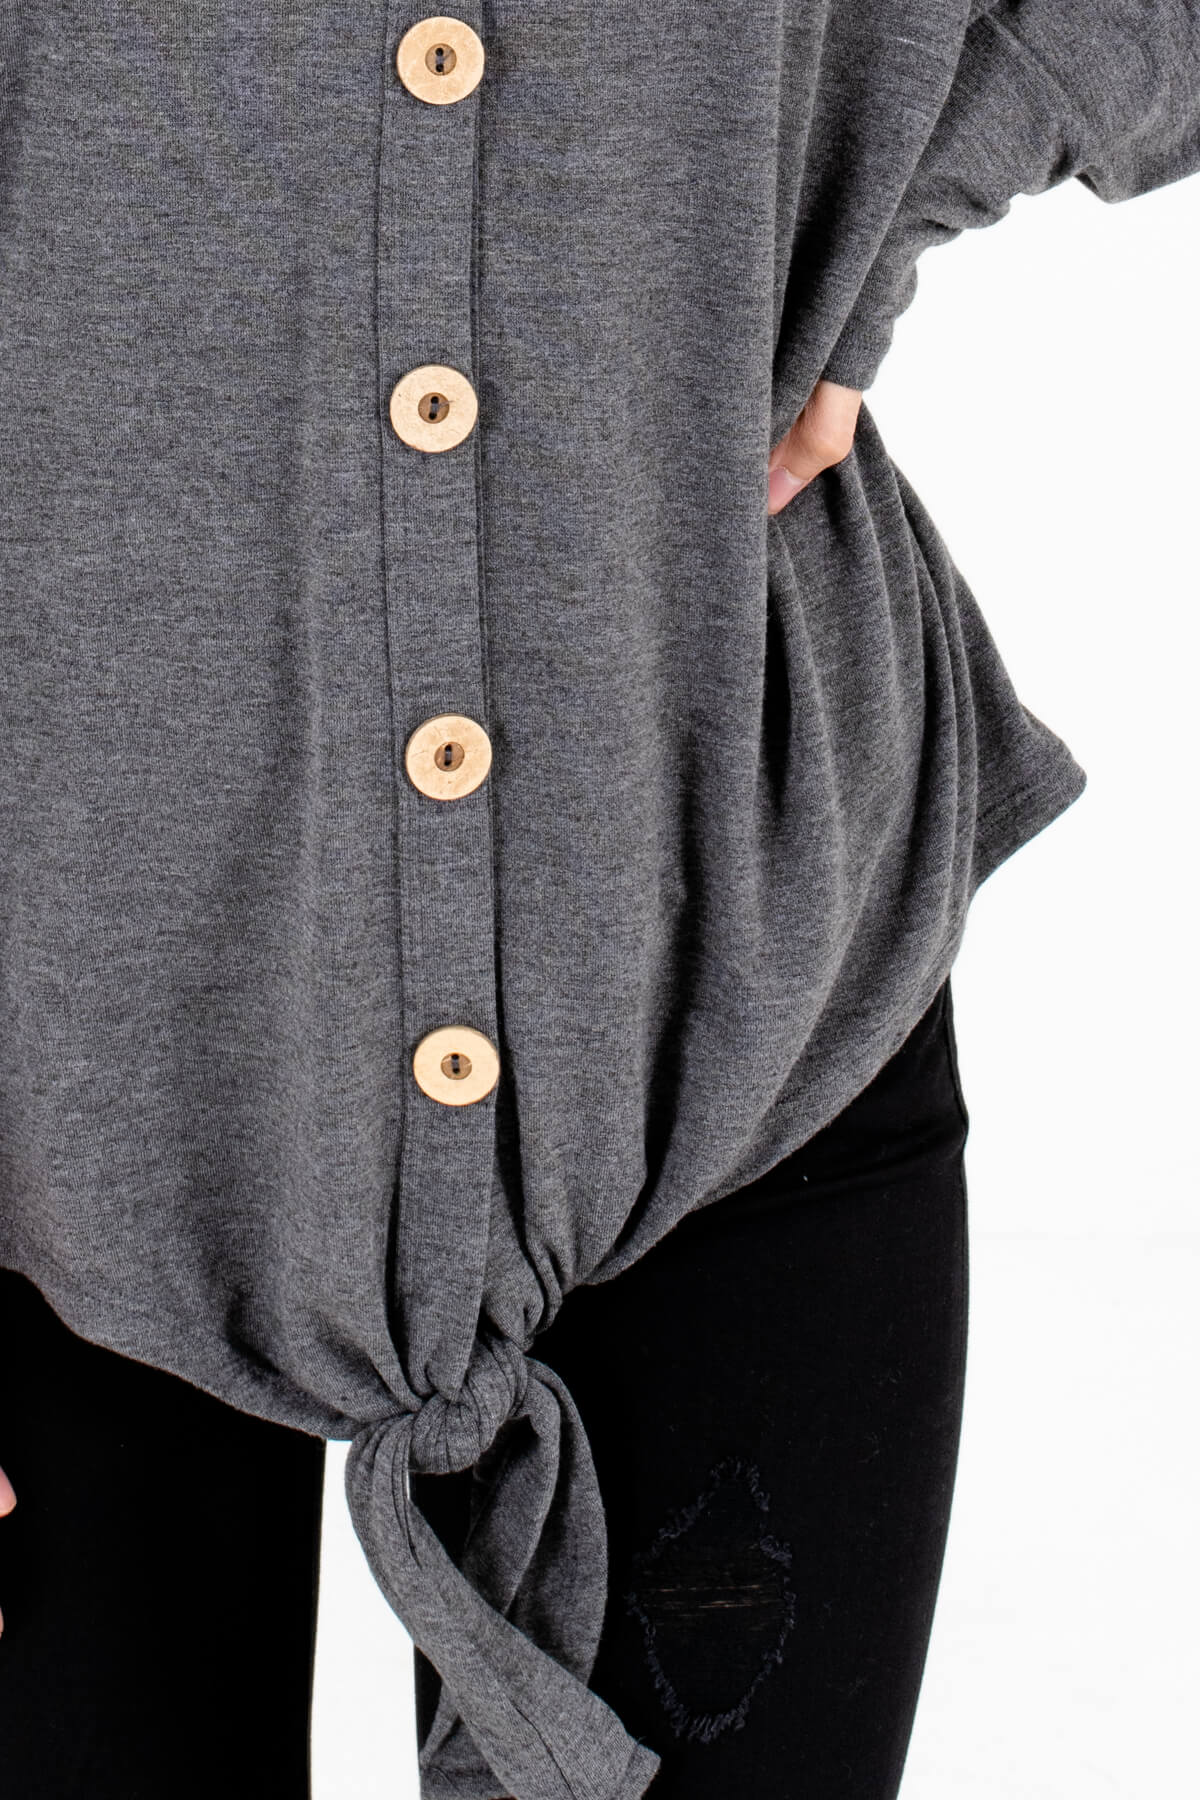 Charcoal Gray Affordable Online Boutique Clothing for Women